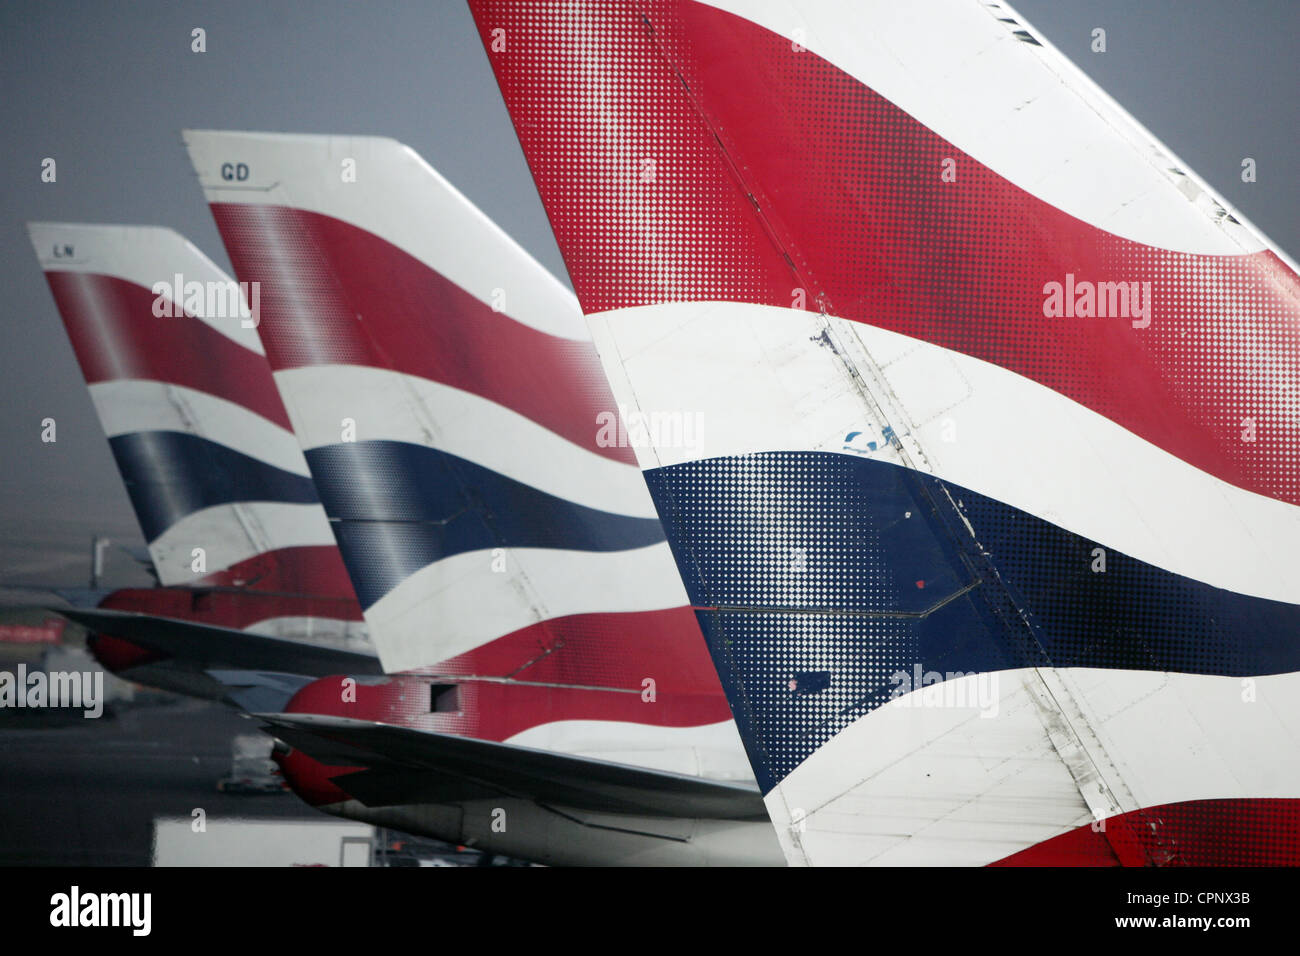 3 British Airways 747 tail thins line up at London Heathrow airport after flights are delayed by fog Stock Photo